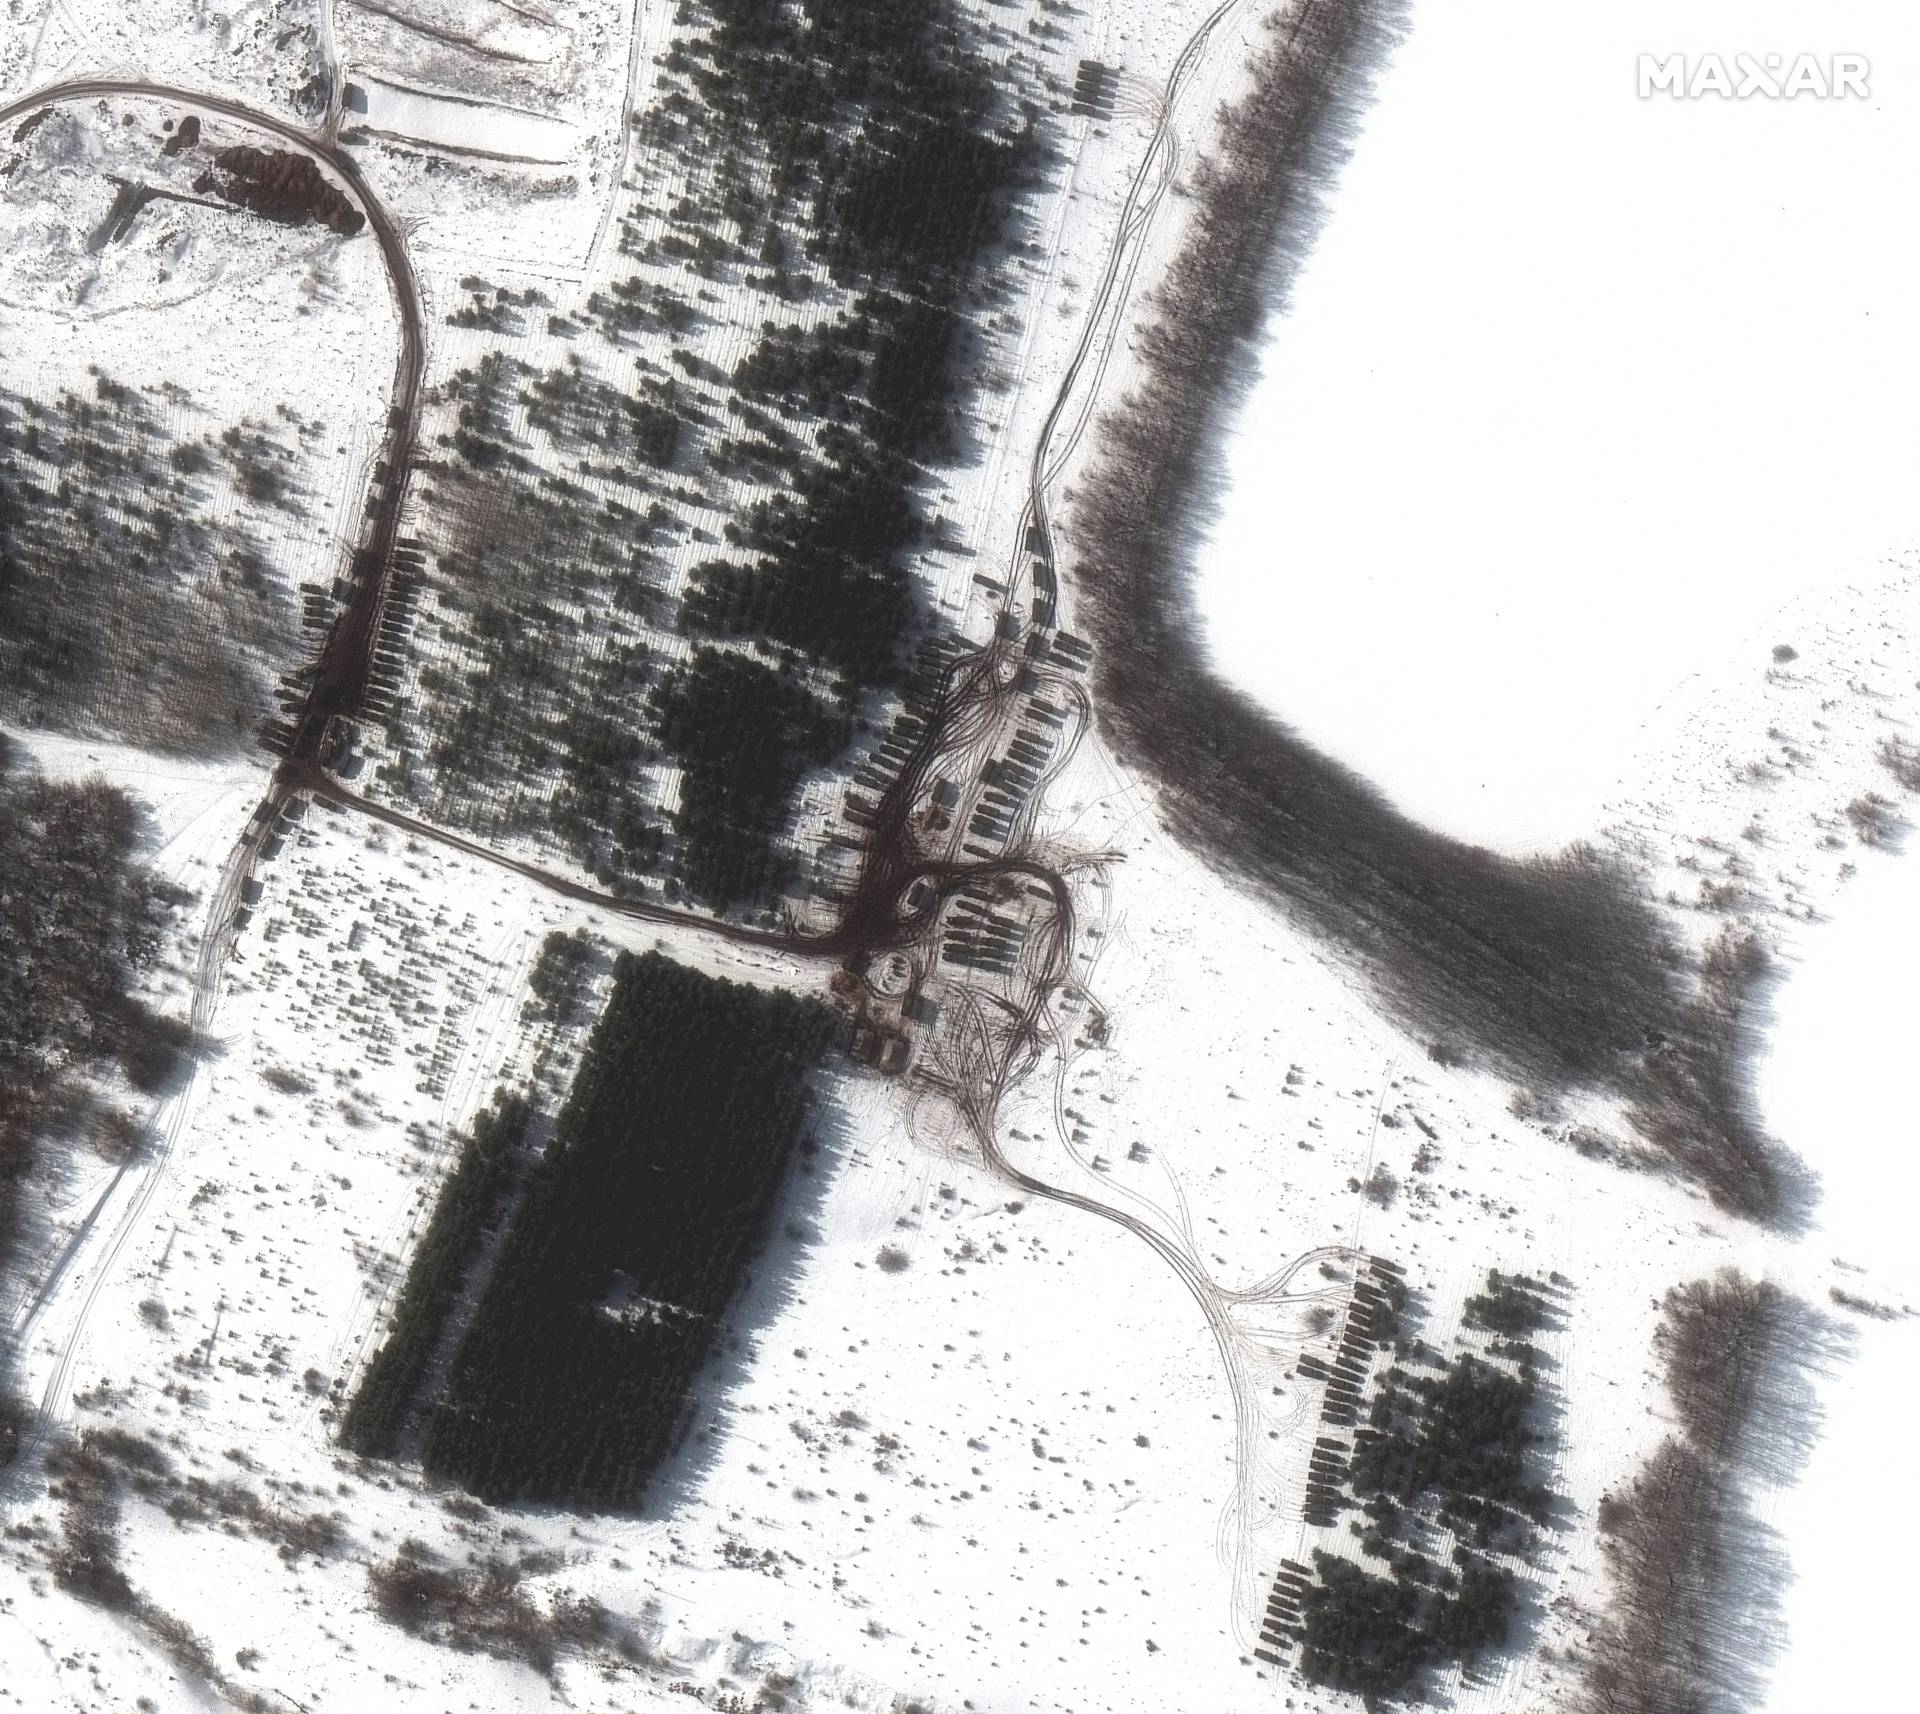 A satellite image shows an overview of a new deployment, east of Valuyki